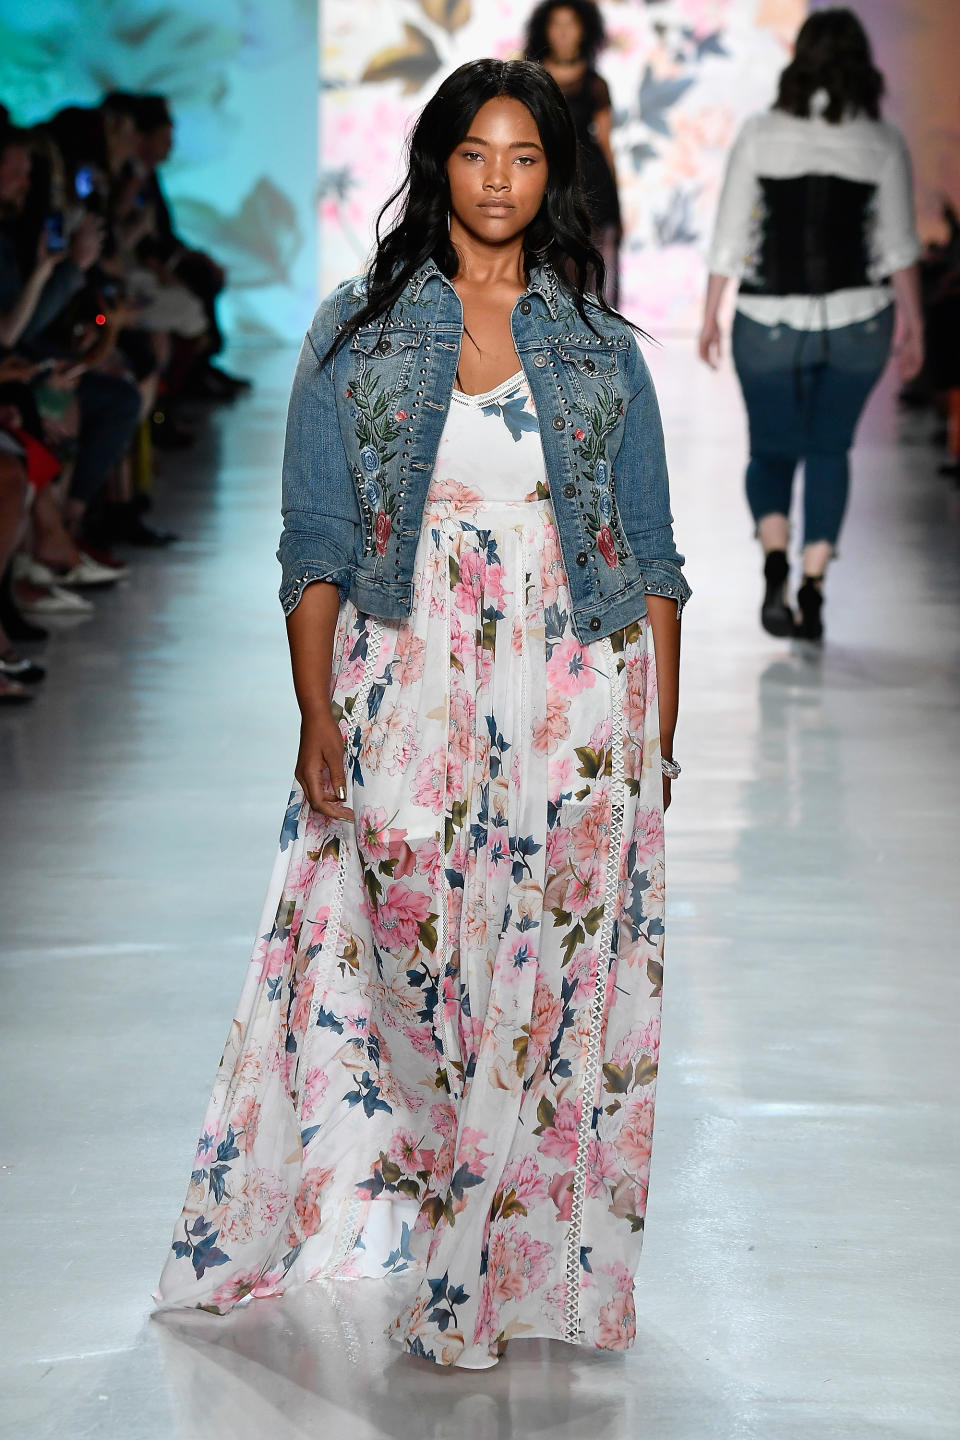 A model in an embroidered denim jacket and a floral dress at the Torrid show during NYFW. 